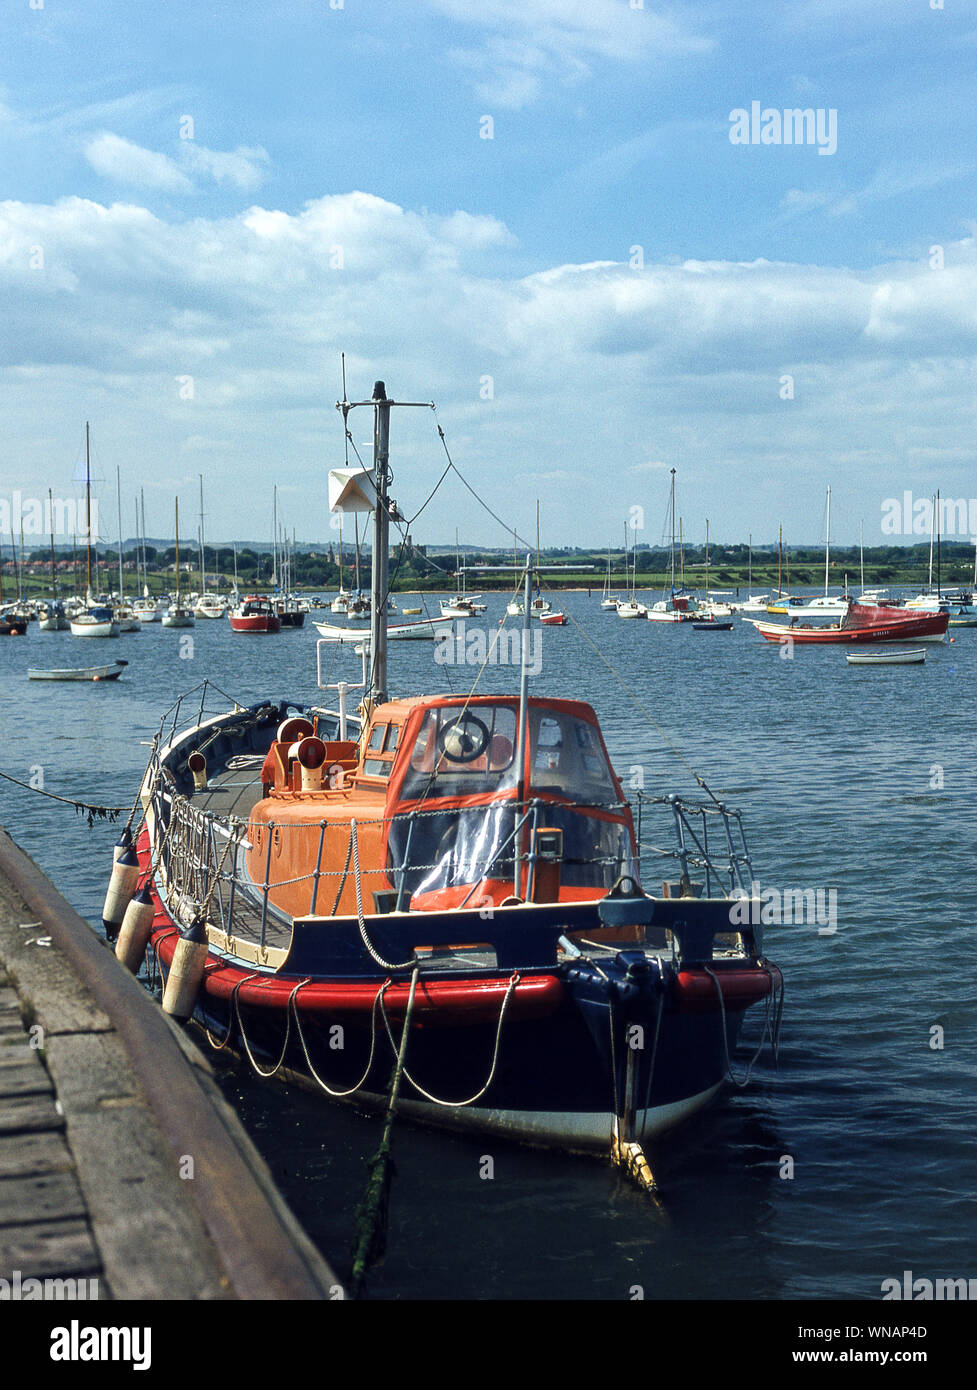 Amble. Northhumberland. The lifeboat tied up in Amble Marina which runs into the North Sea in Alnmouth Bay.North East England. Stock Photo